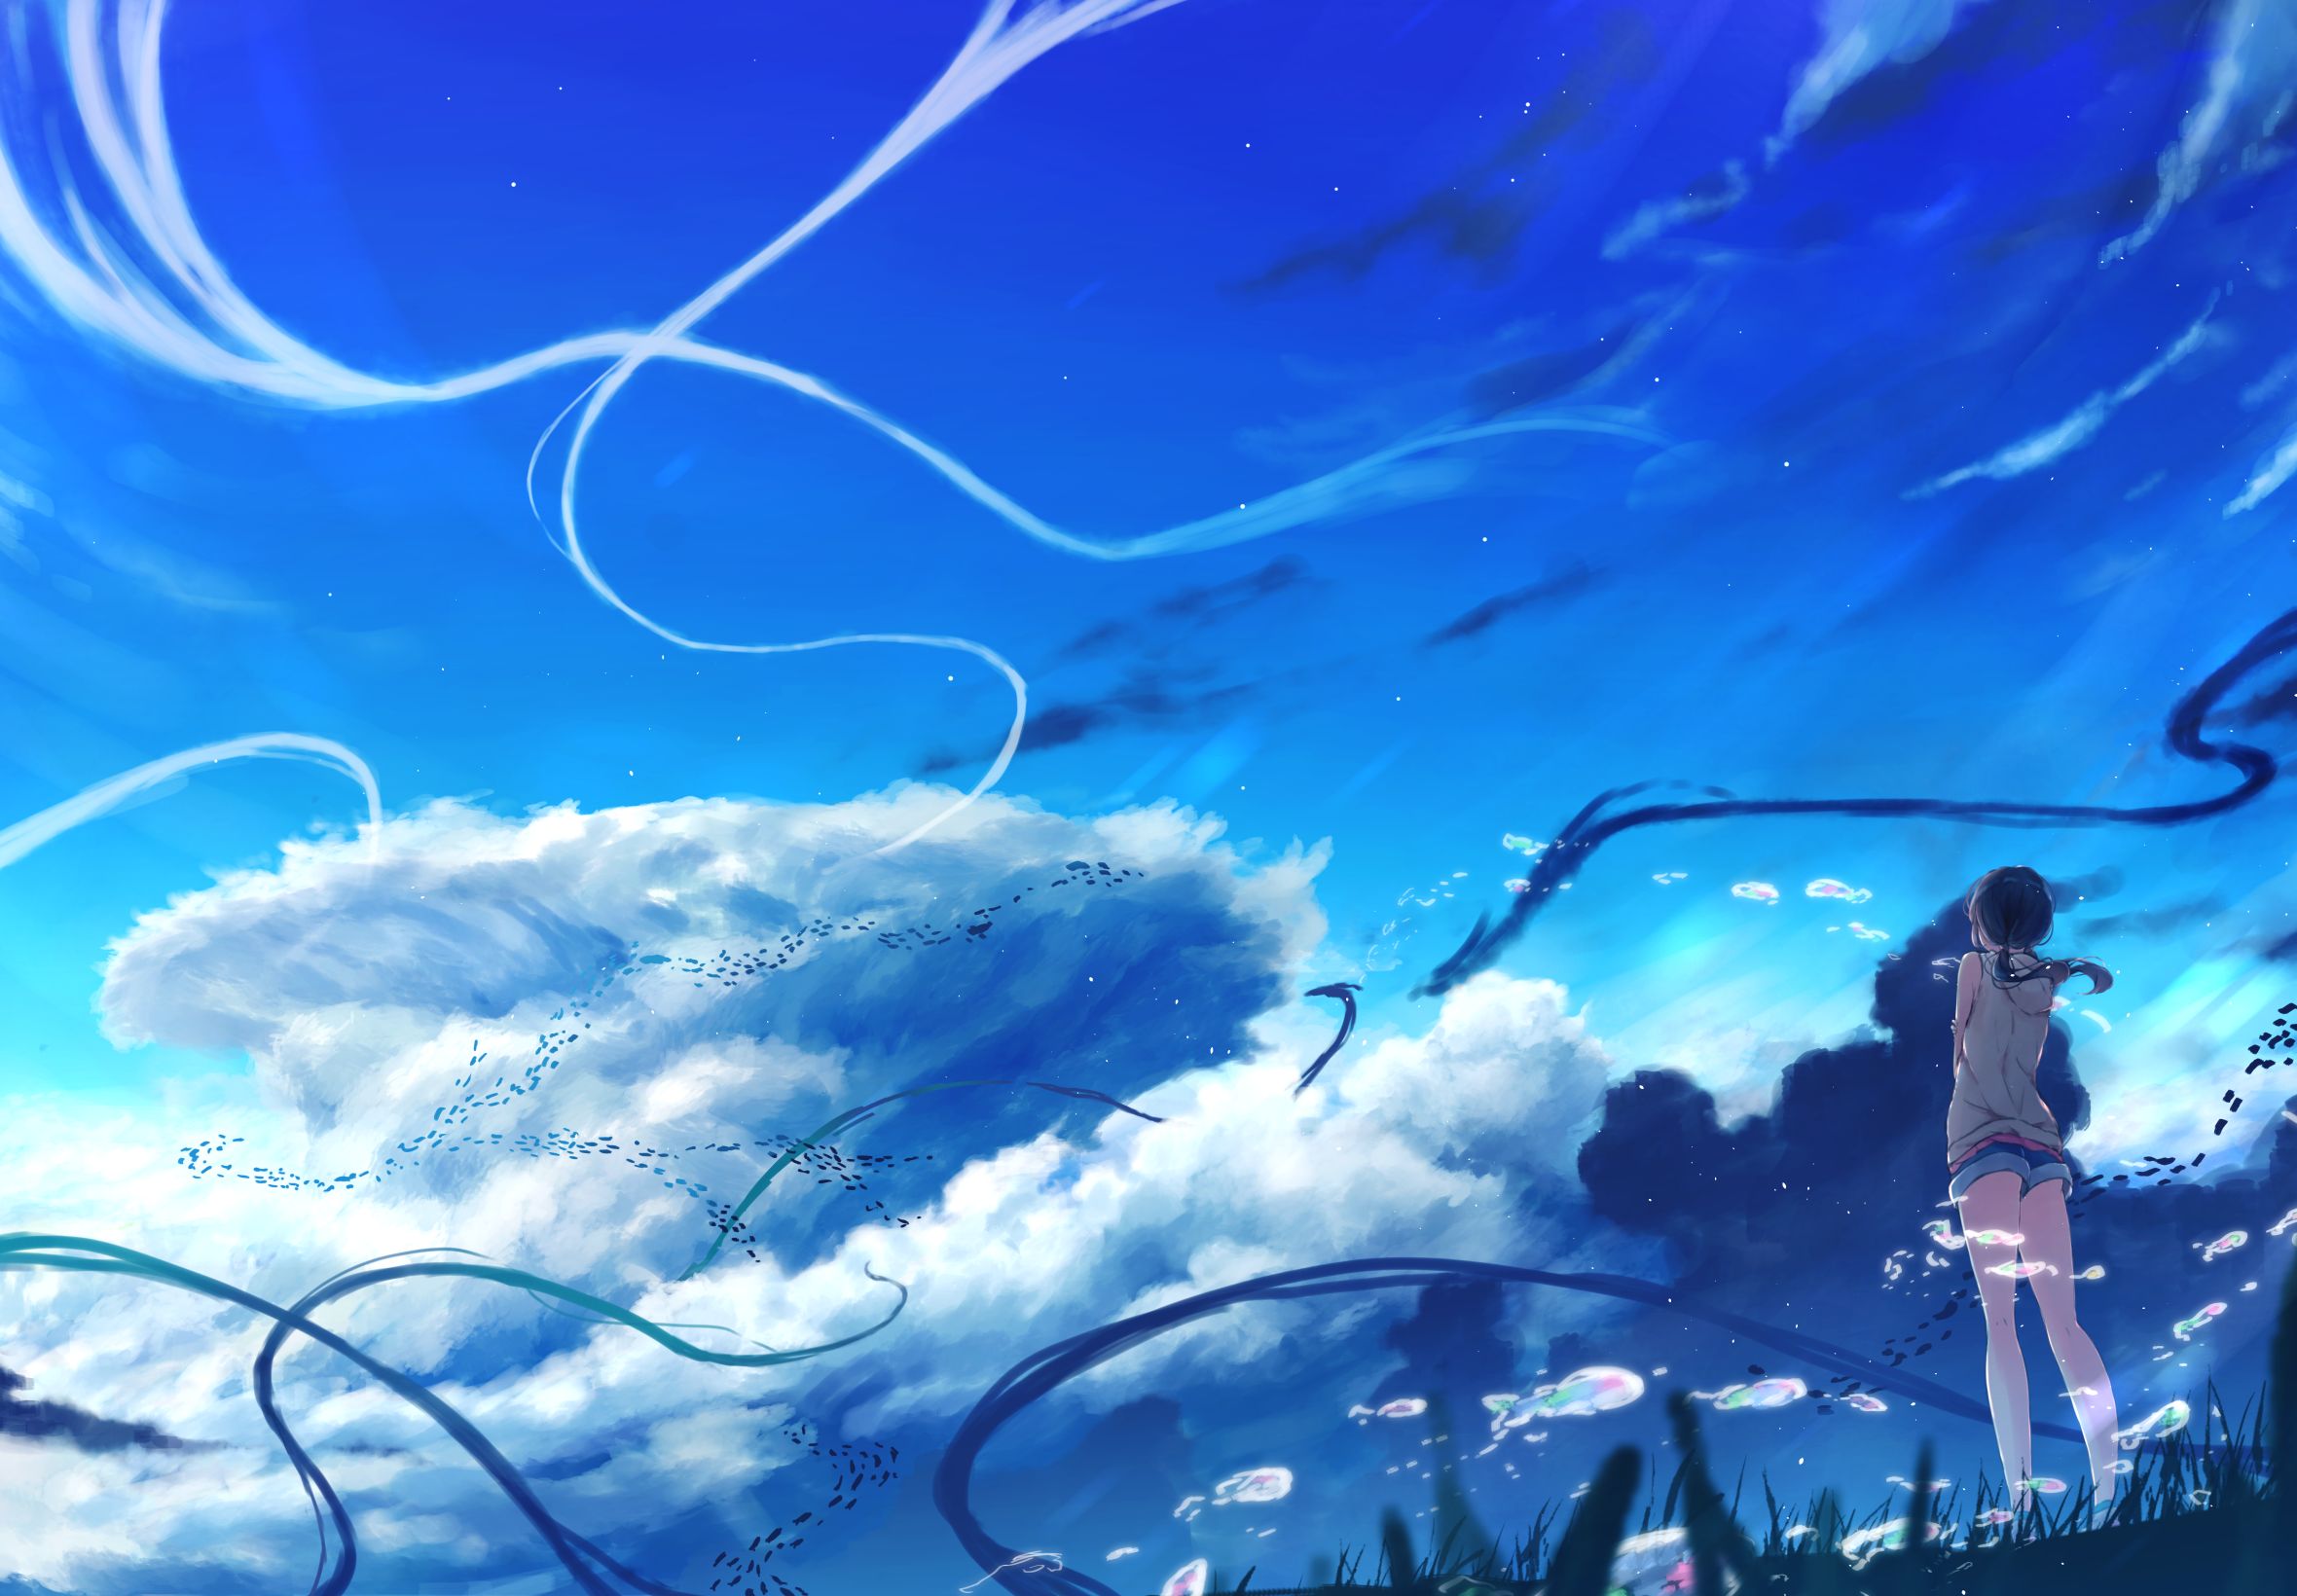 Anime Sky Images  90 Images backgrounds